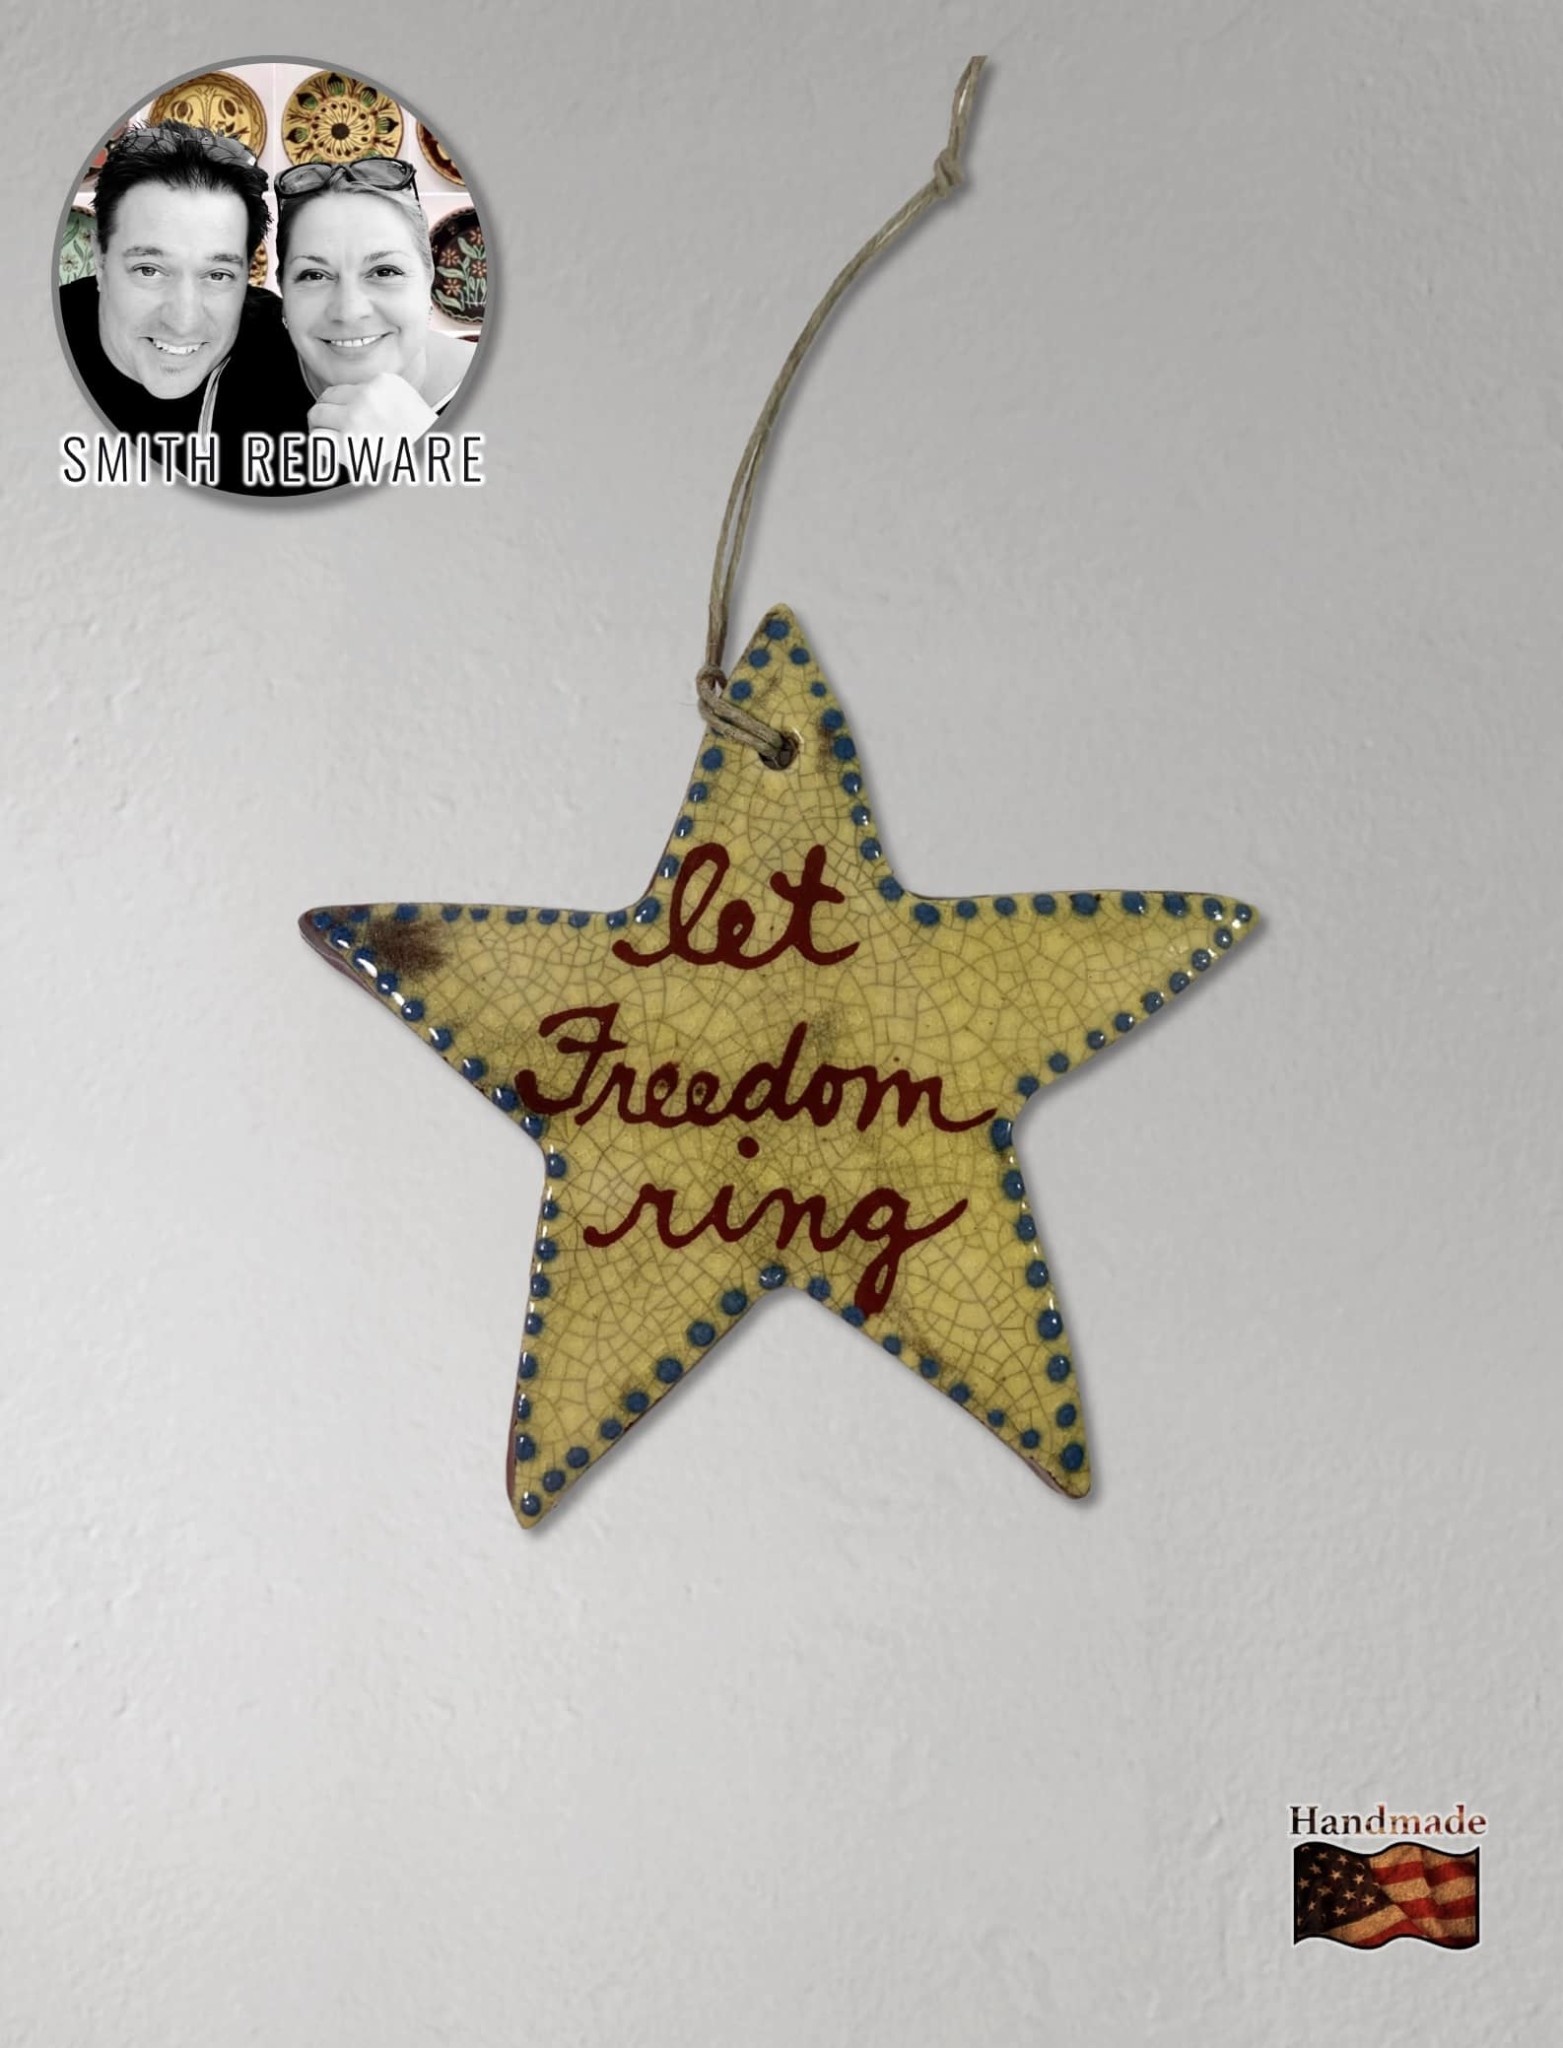 Smith Redware Smith Redware - Let Freedom Ring Star Ornament Yellow Brand: Smith Redware